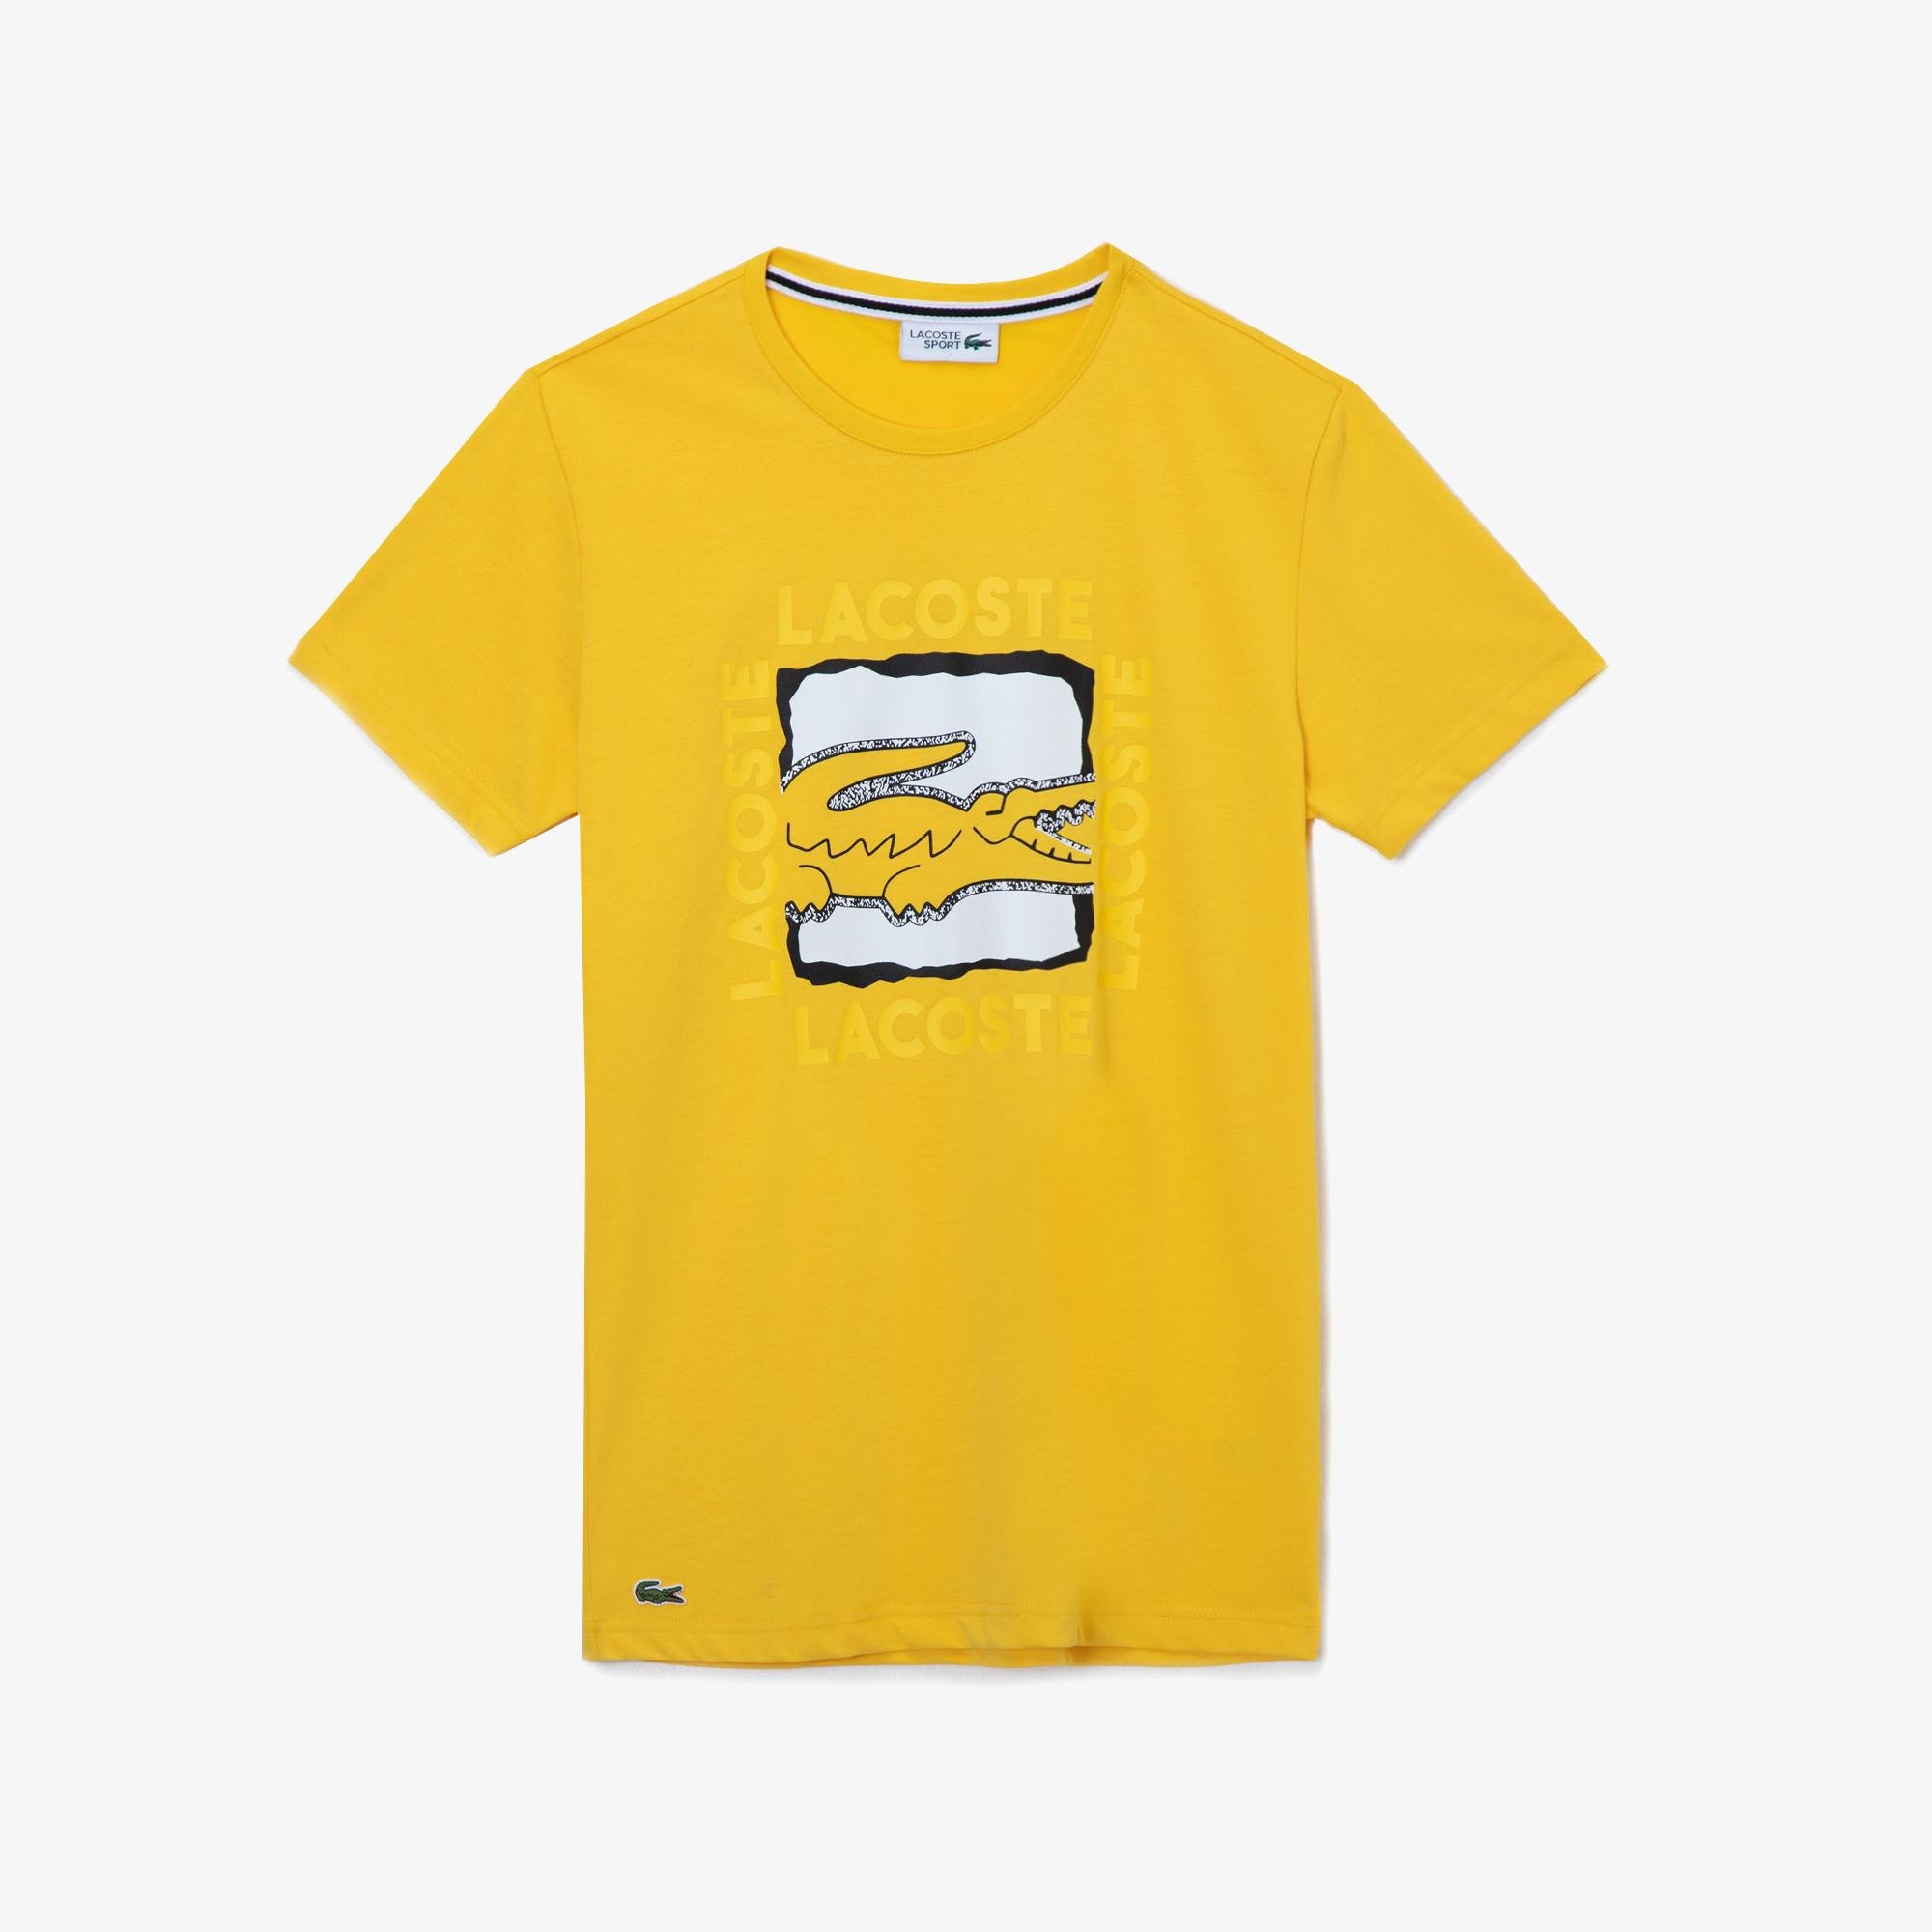 Lacoste Men's Sportowy T-Shirt with pattern 3D